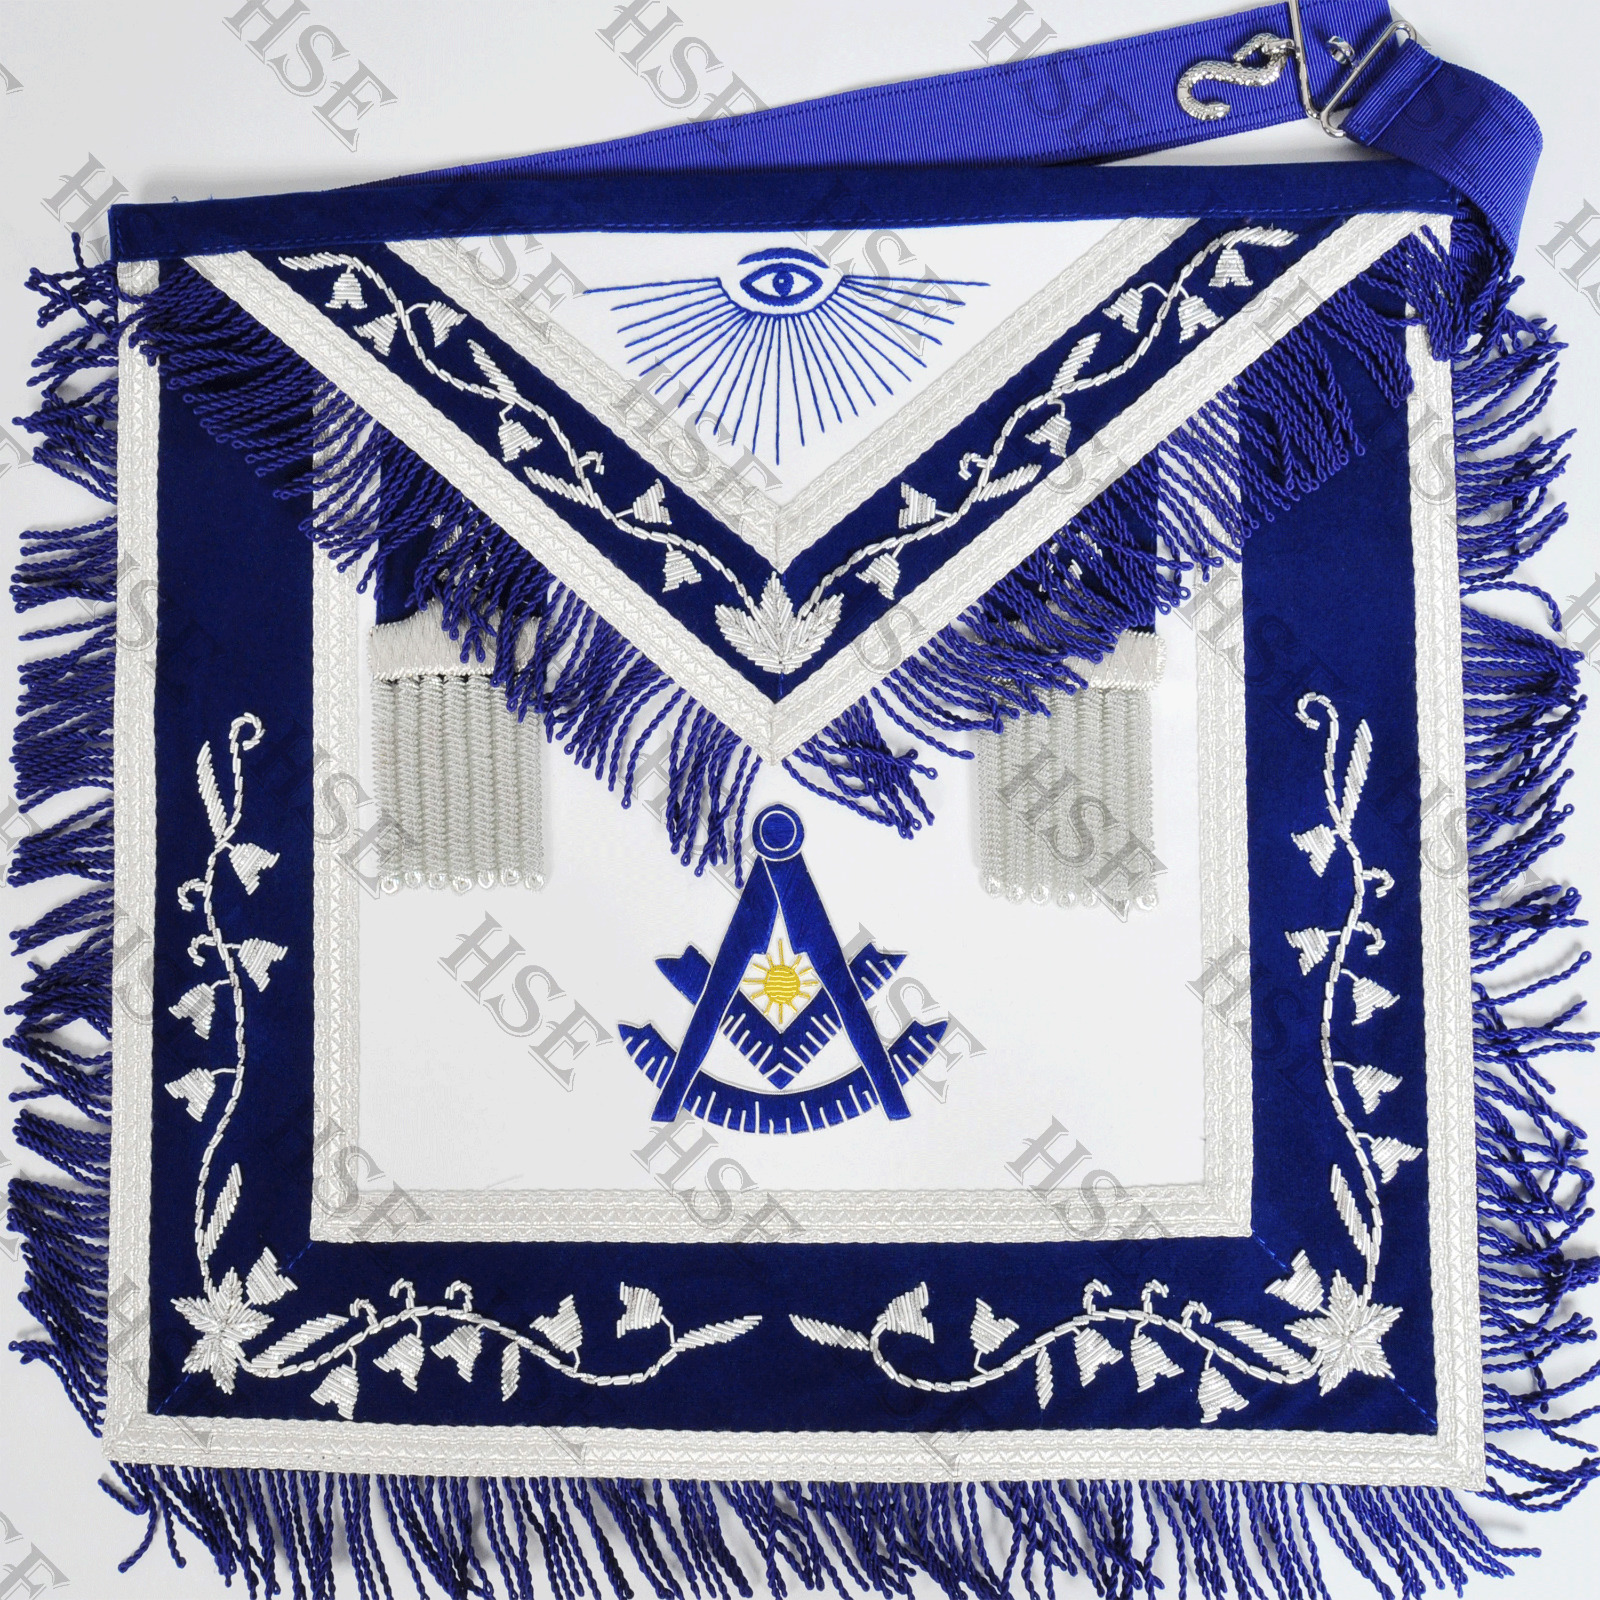 NEW EMBROIDERY PAST MASTER APRON BLUE VELVET-HSE